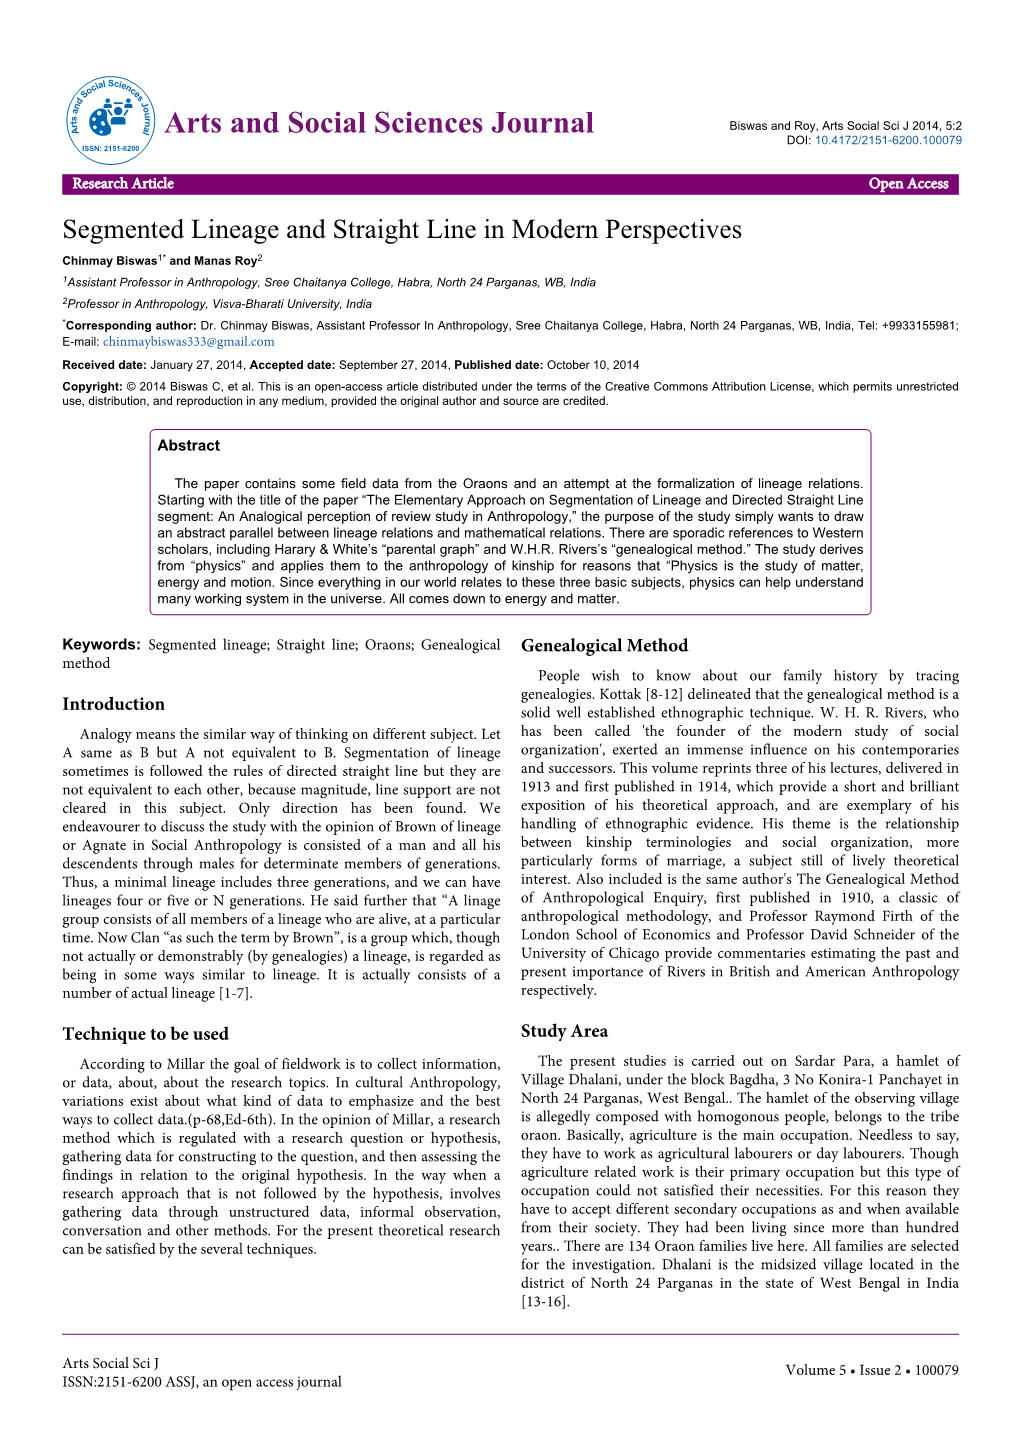 Segmented Lineage and Straight Line in Modern Perspectives